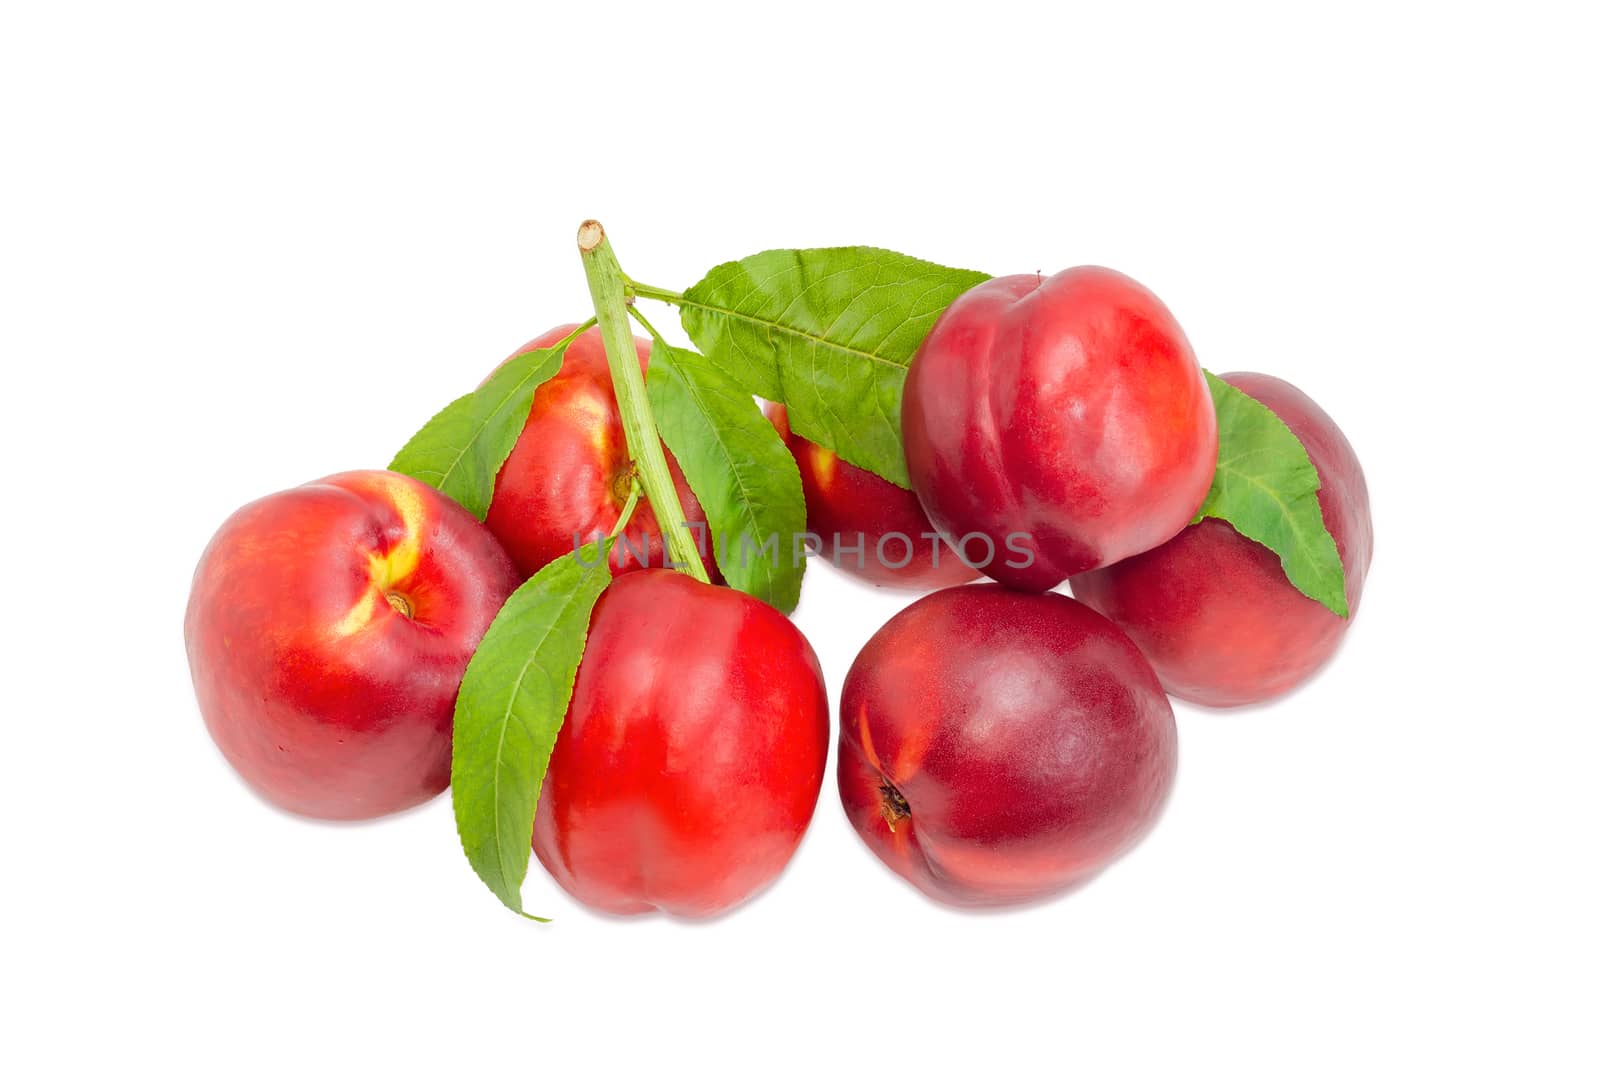 Pile of the ripe fresh nectarines with twig and leaves on a light background
